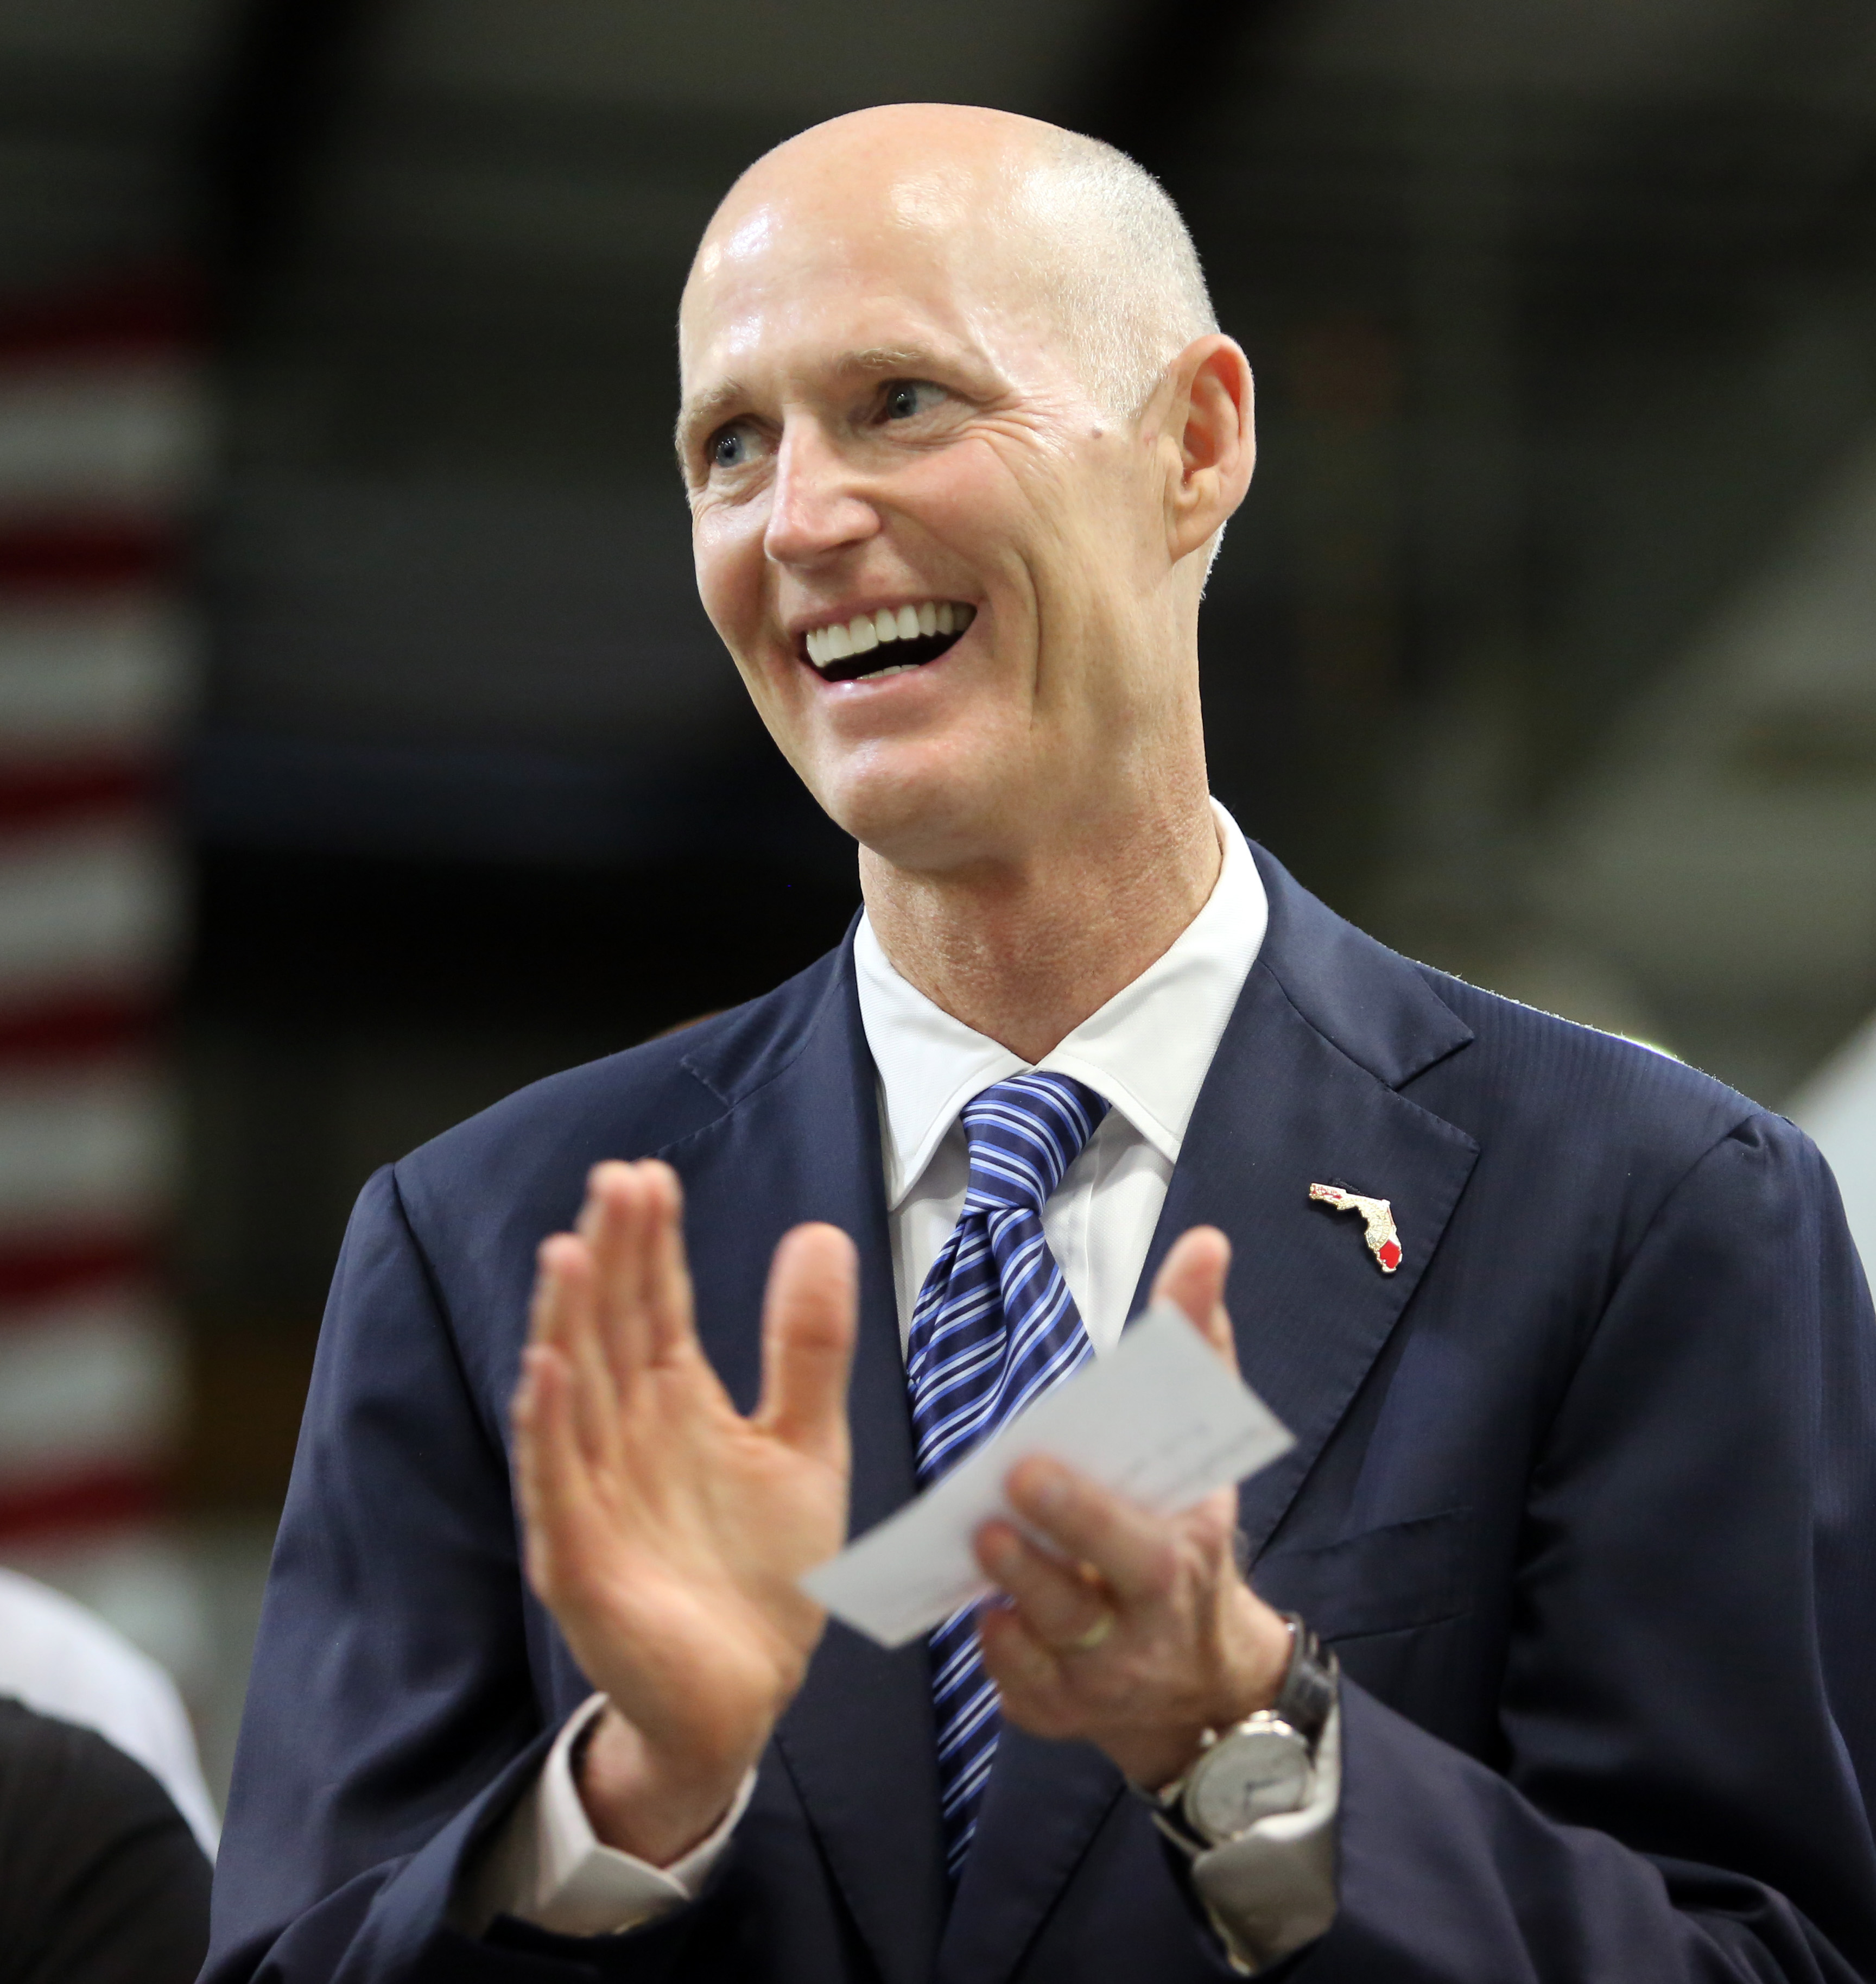 Rick Scott: Not a scientist—and darn proud to say it (Orlando Sentinel; MCT via Getty Images)